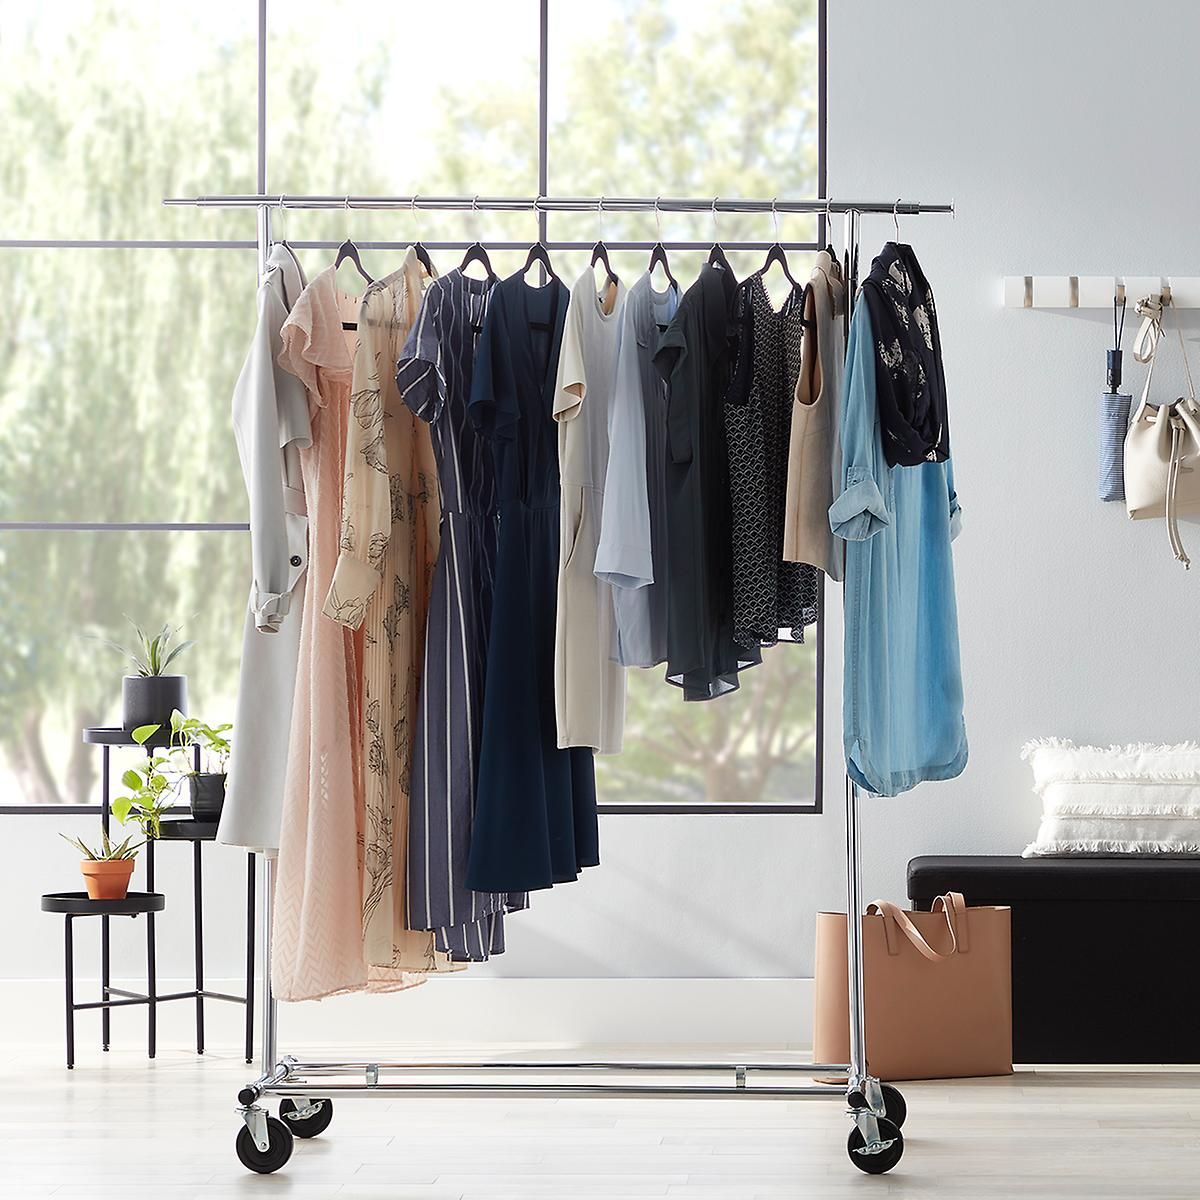 Chrome Commercial Folding Garment Rack | The Container Store